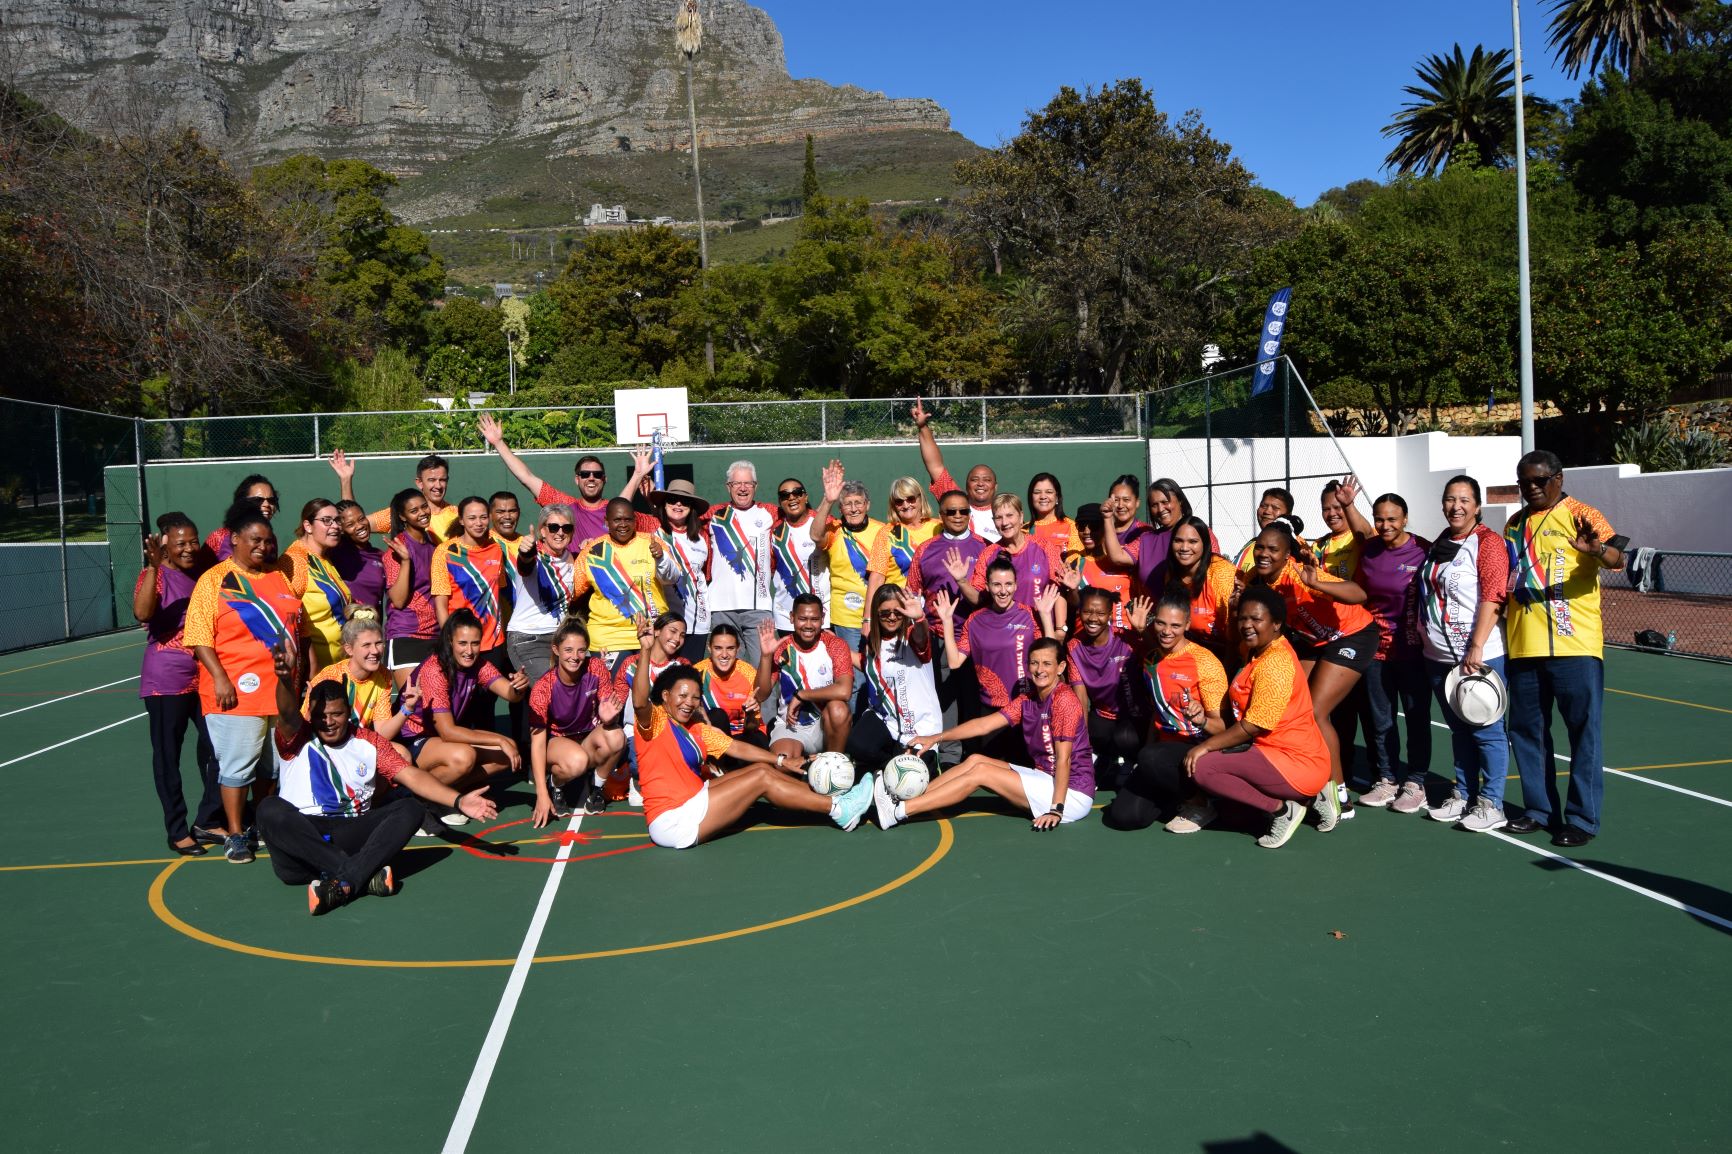 Premier Winde, Minister Marais, Western Cape Government staff and provincial netball players all participated in the day.